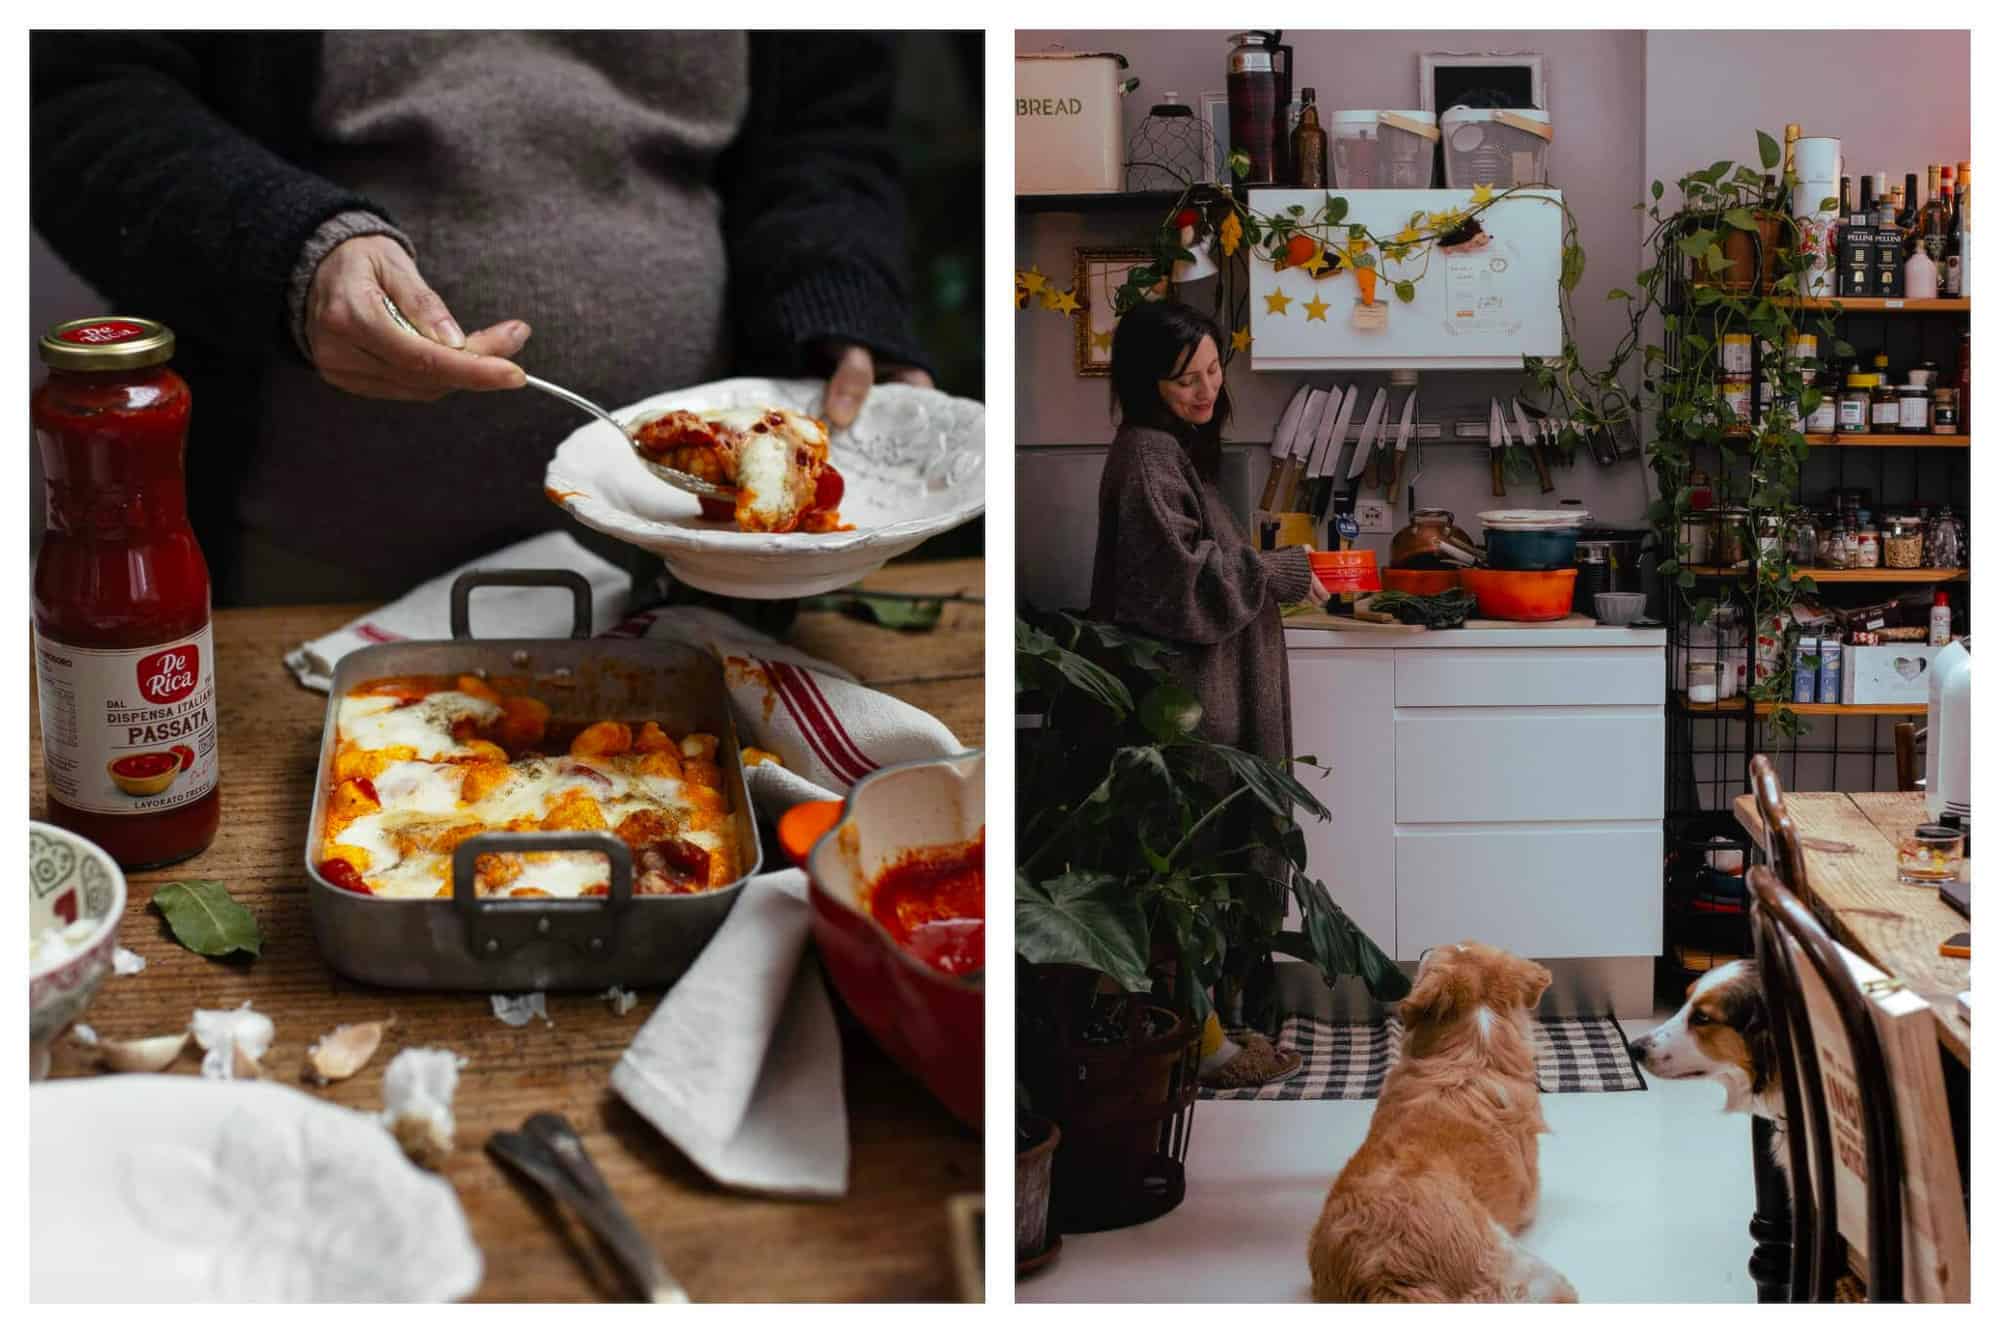 Left: A lasagna being sliced out of a contained and placed onto a plate. Right: A woman standing in her kitchen smiling down at her dogs.